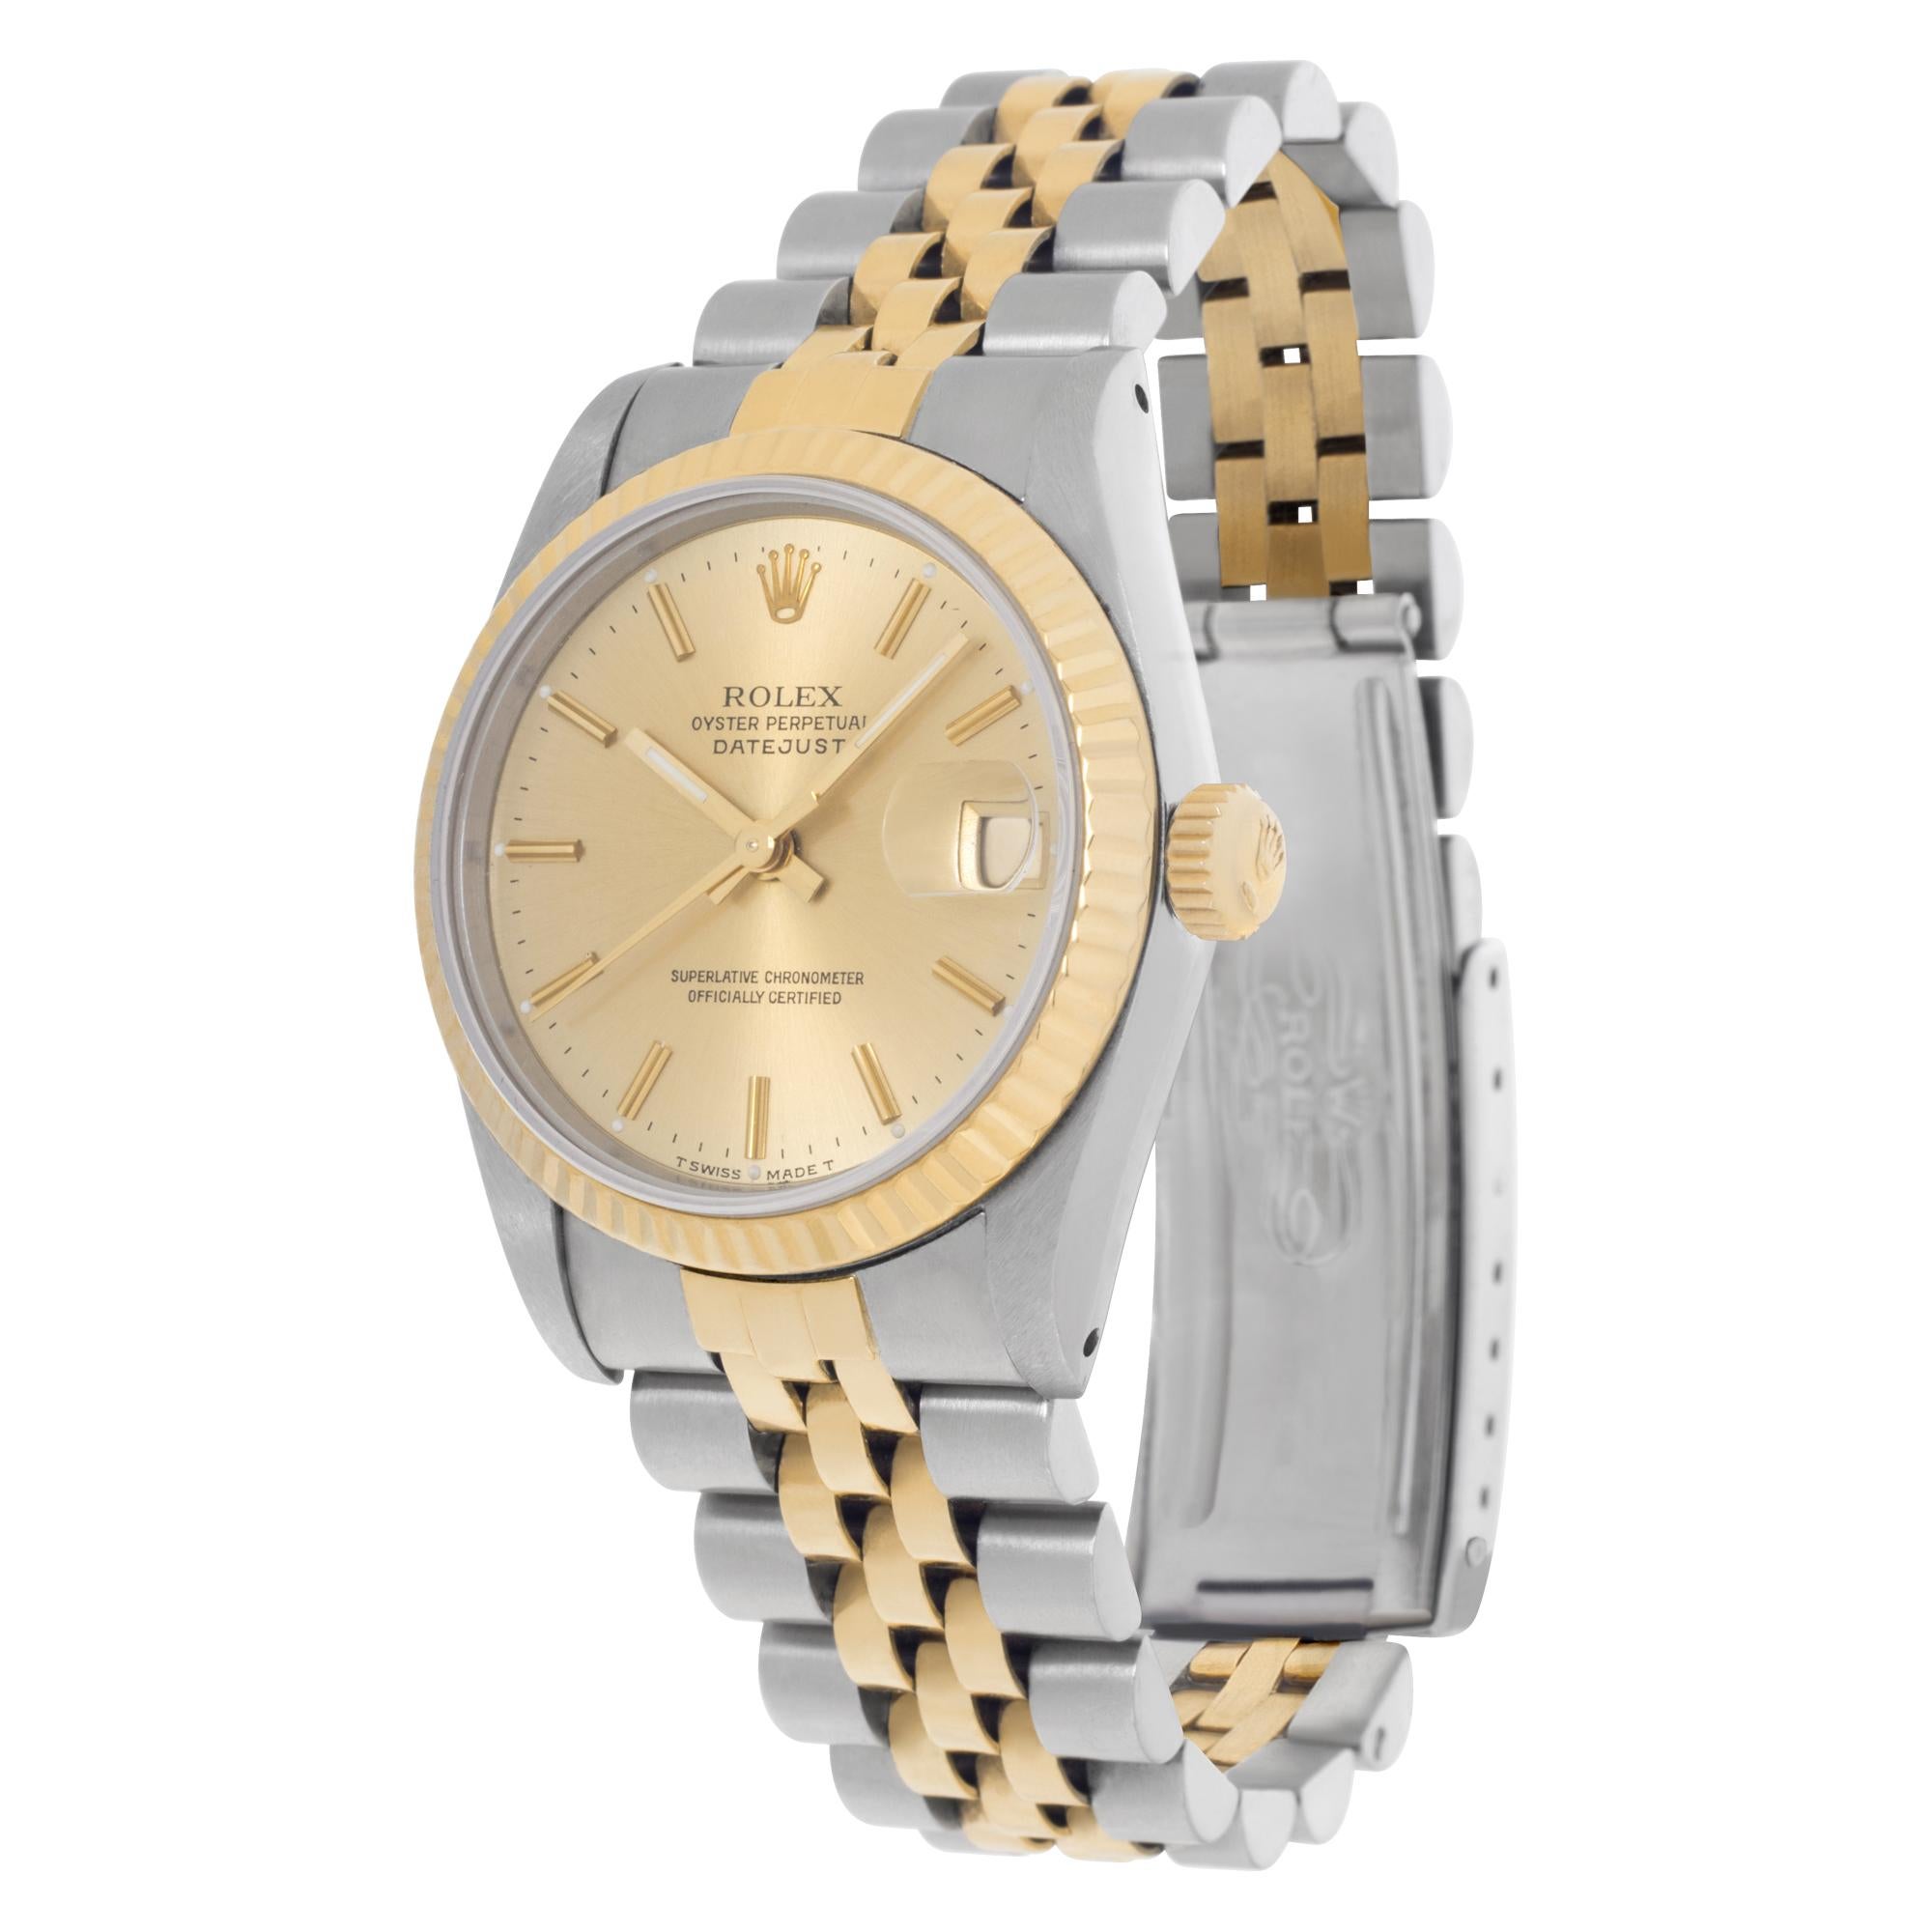 Rolex Datejust in 18k & stainless steel. Auto w/ sweep seconds and date. 31 mm case size.  Ref 68273. Circa 1990. Fine Pre-owned Rolex Watch.

Certified preowned Classic Rolex Datejust 68273 watch is made out of Stainless steel on a 18k & Stainless